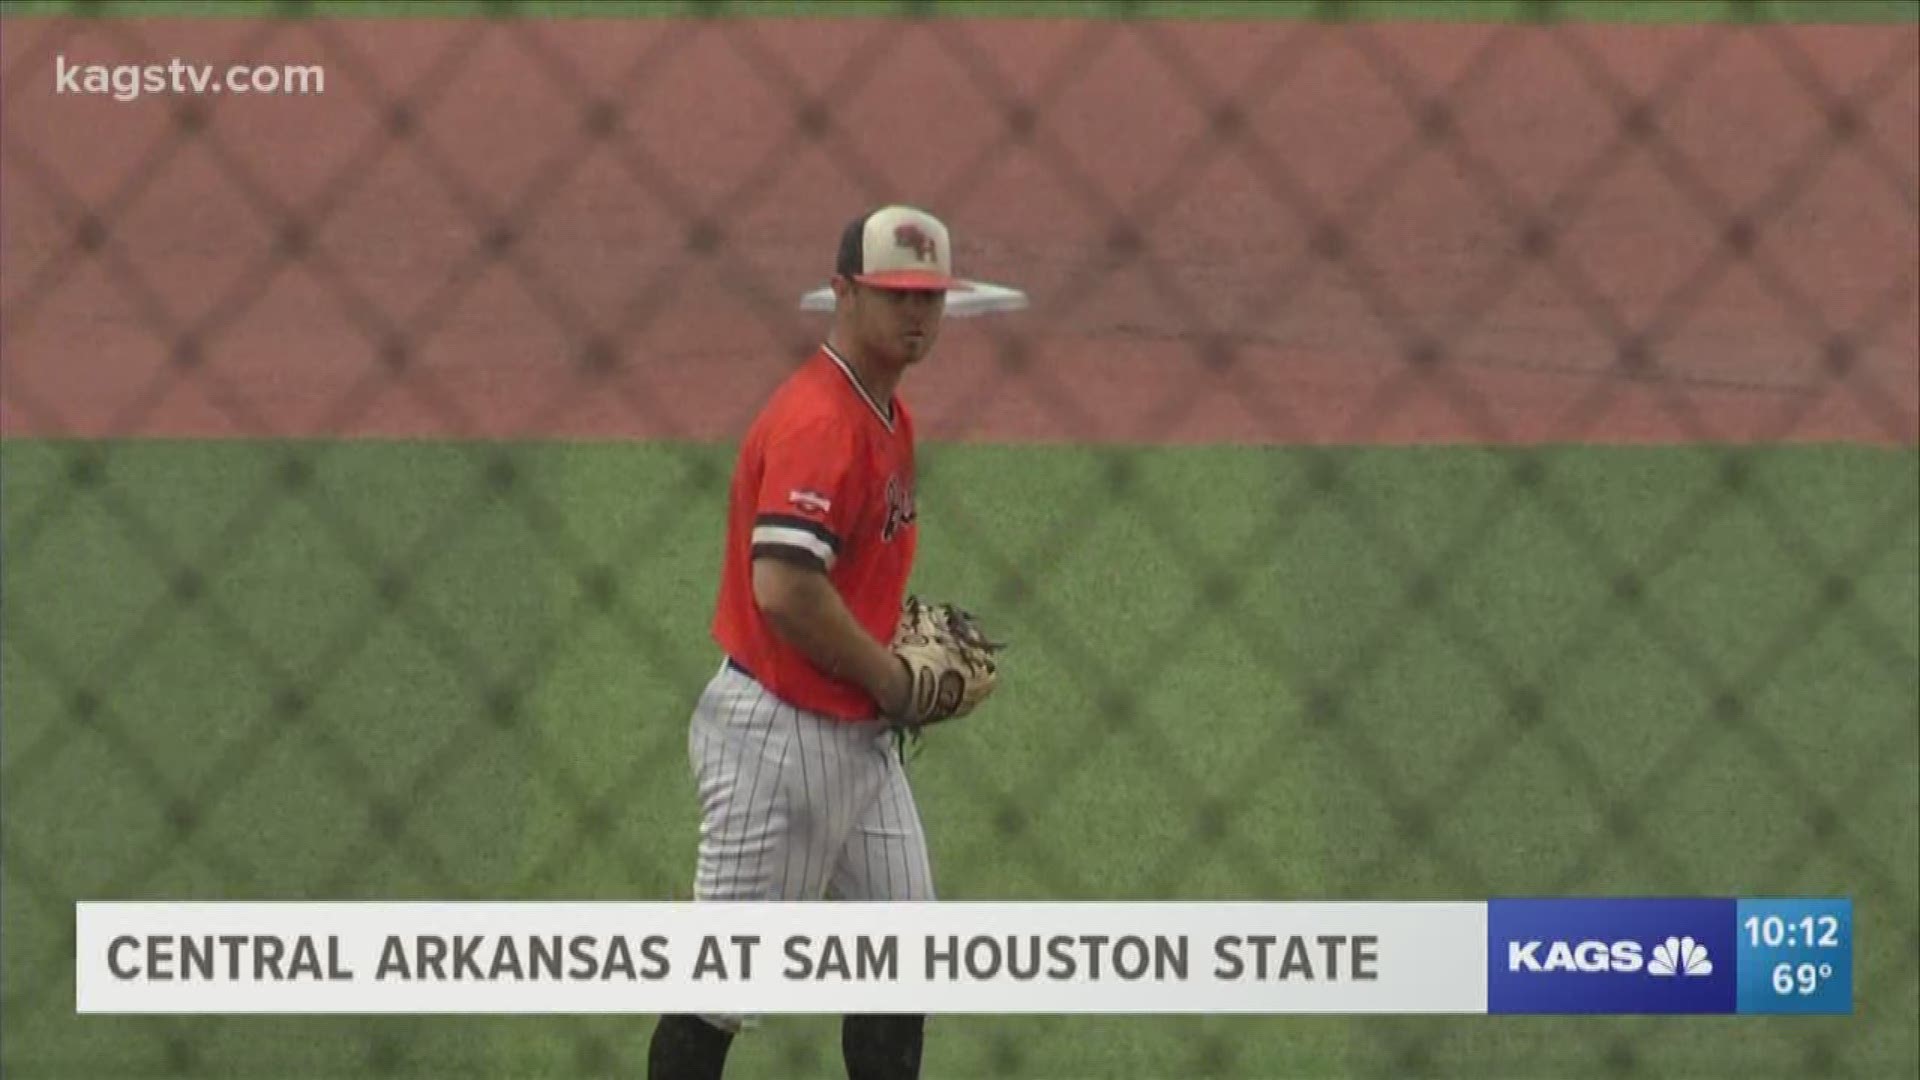 Andrew Fregia recorded his first multi homer game in Sam Houston's 5-3 win.